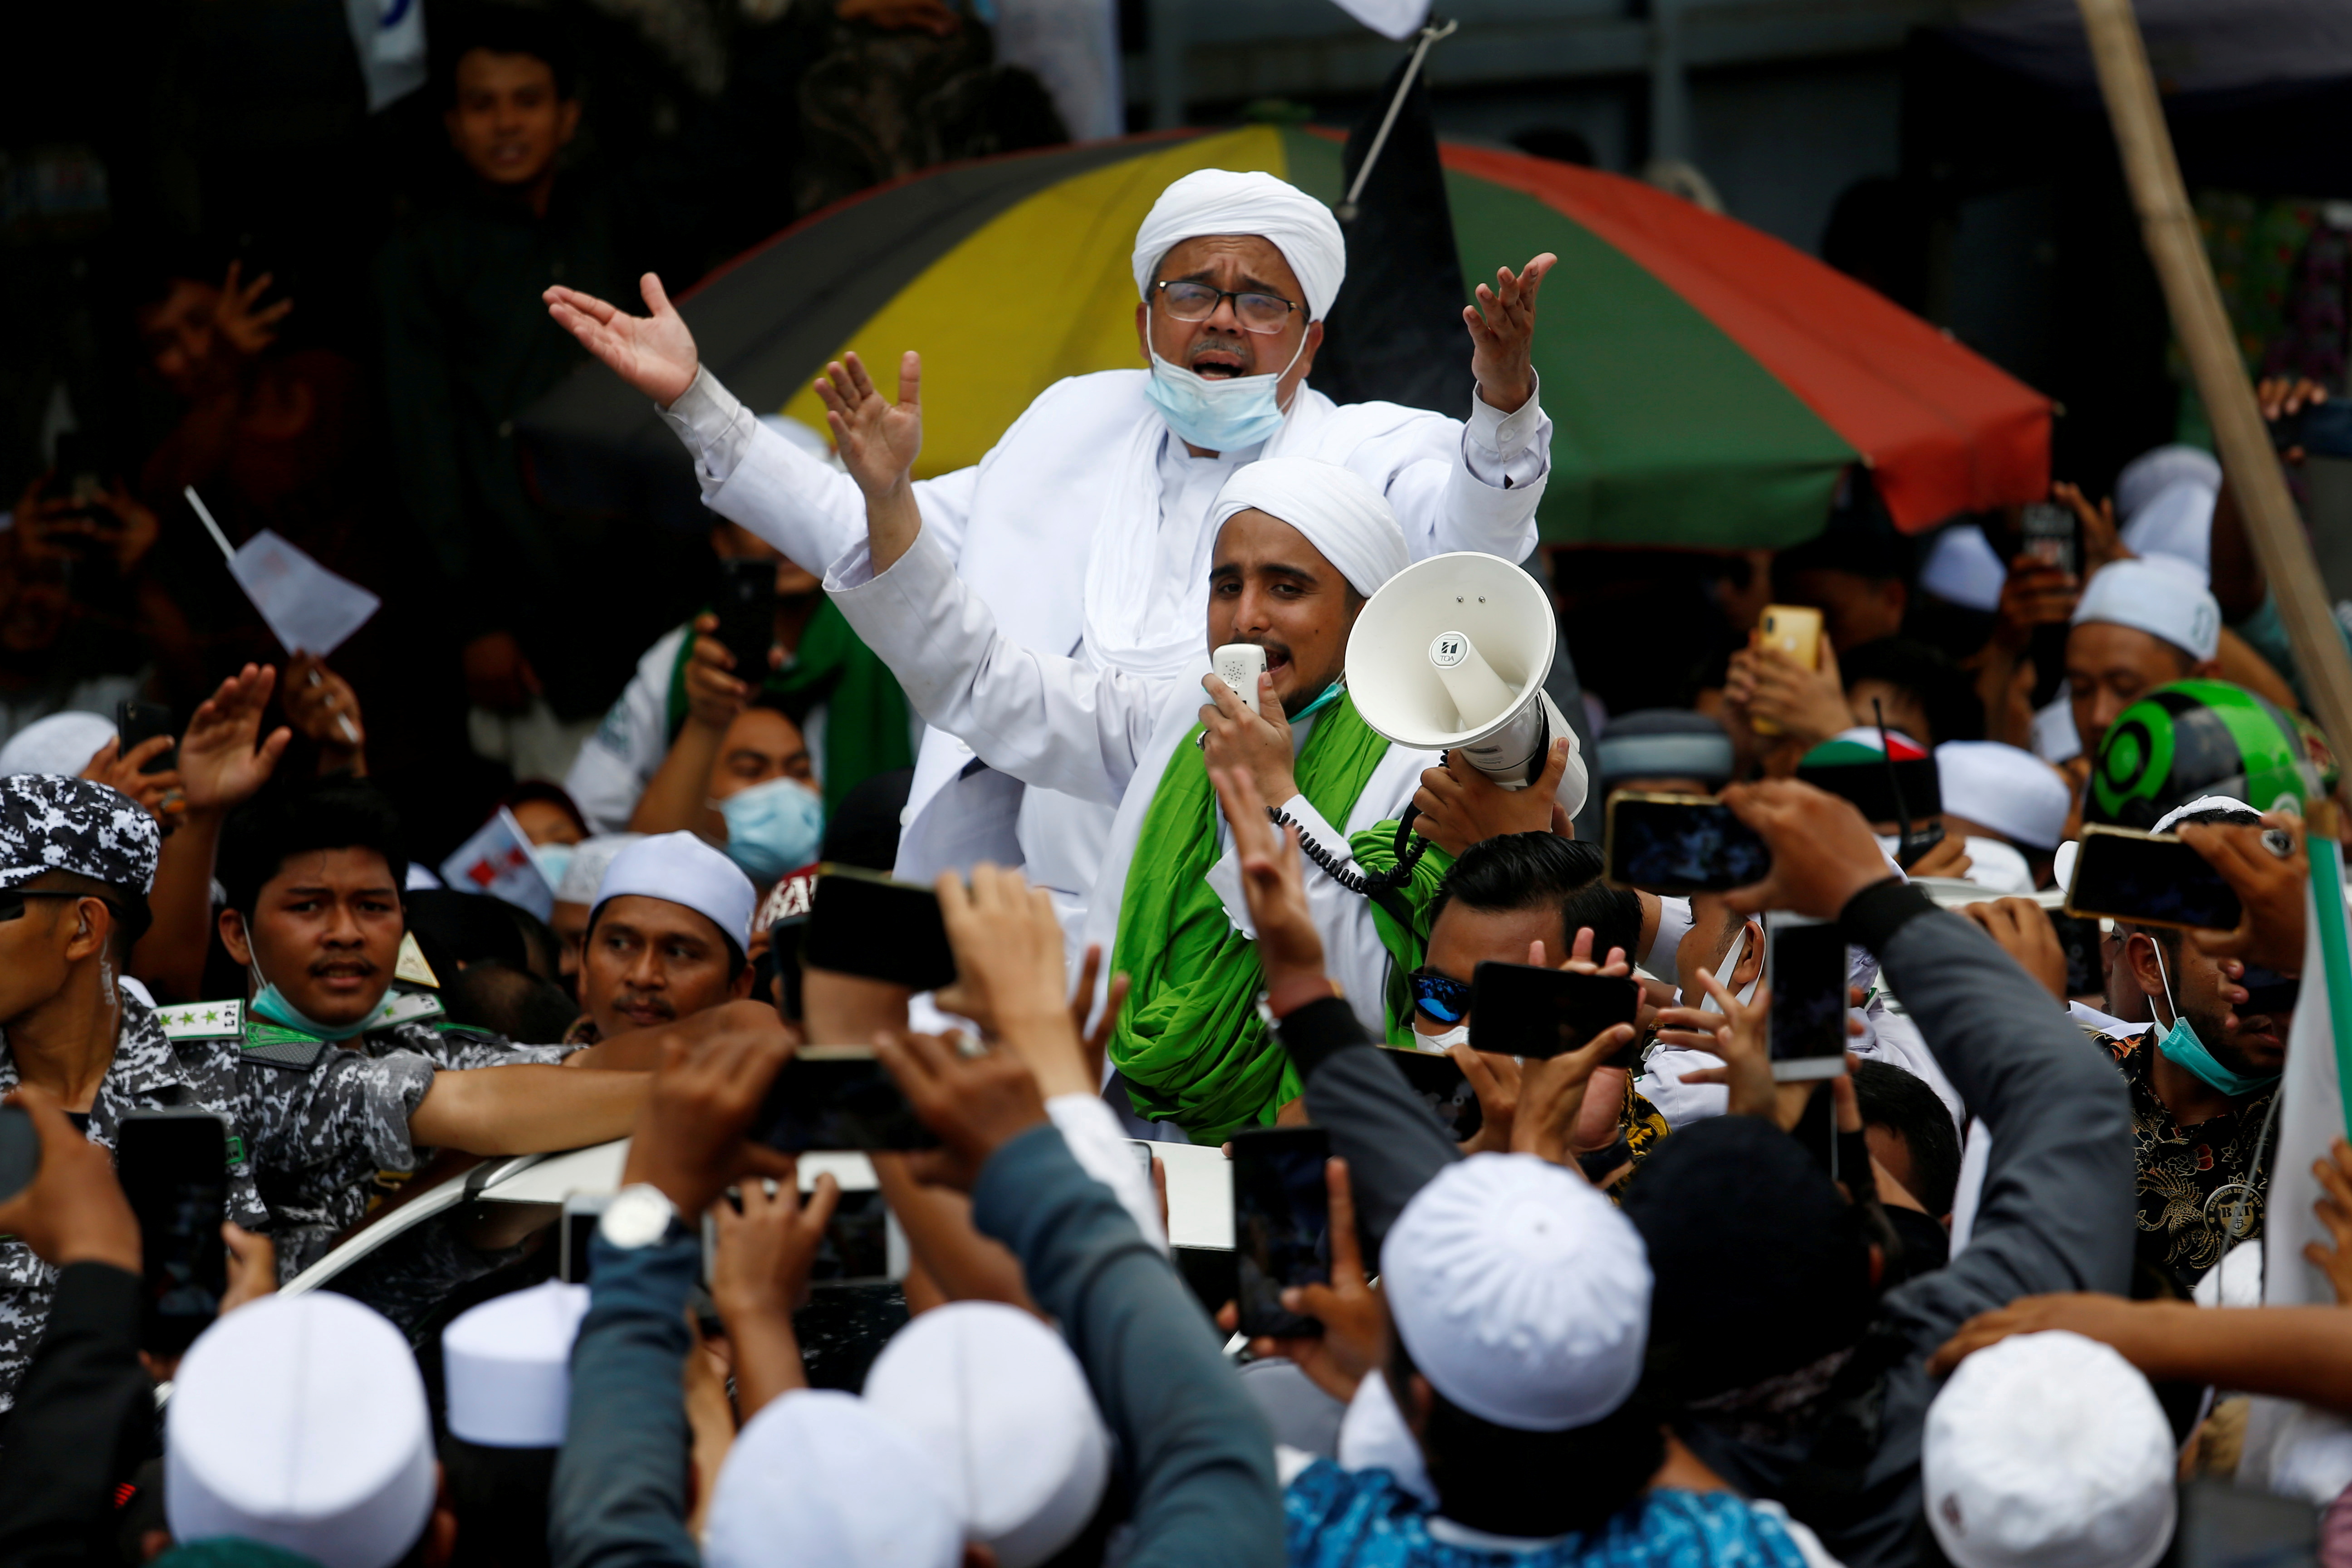 Rizieq Shihab, leader of Indonesian Islamic Defenders Front (FPI), is greeted by supporters at the Tanah Abang